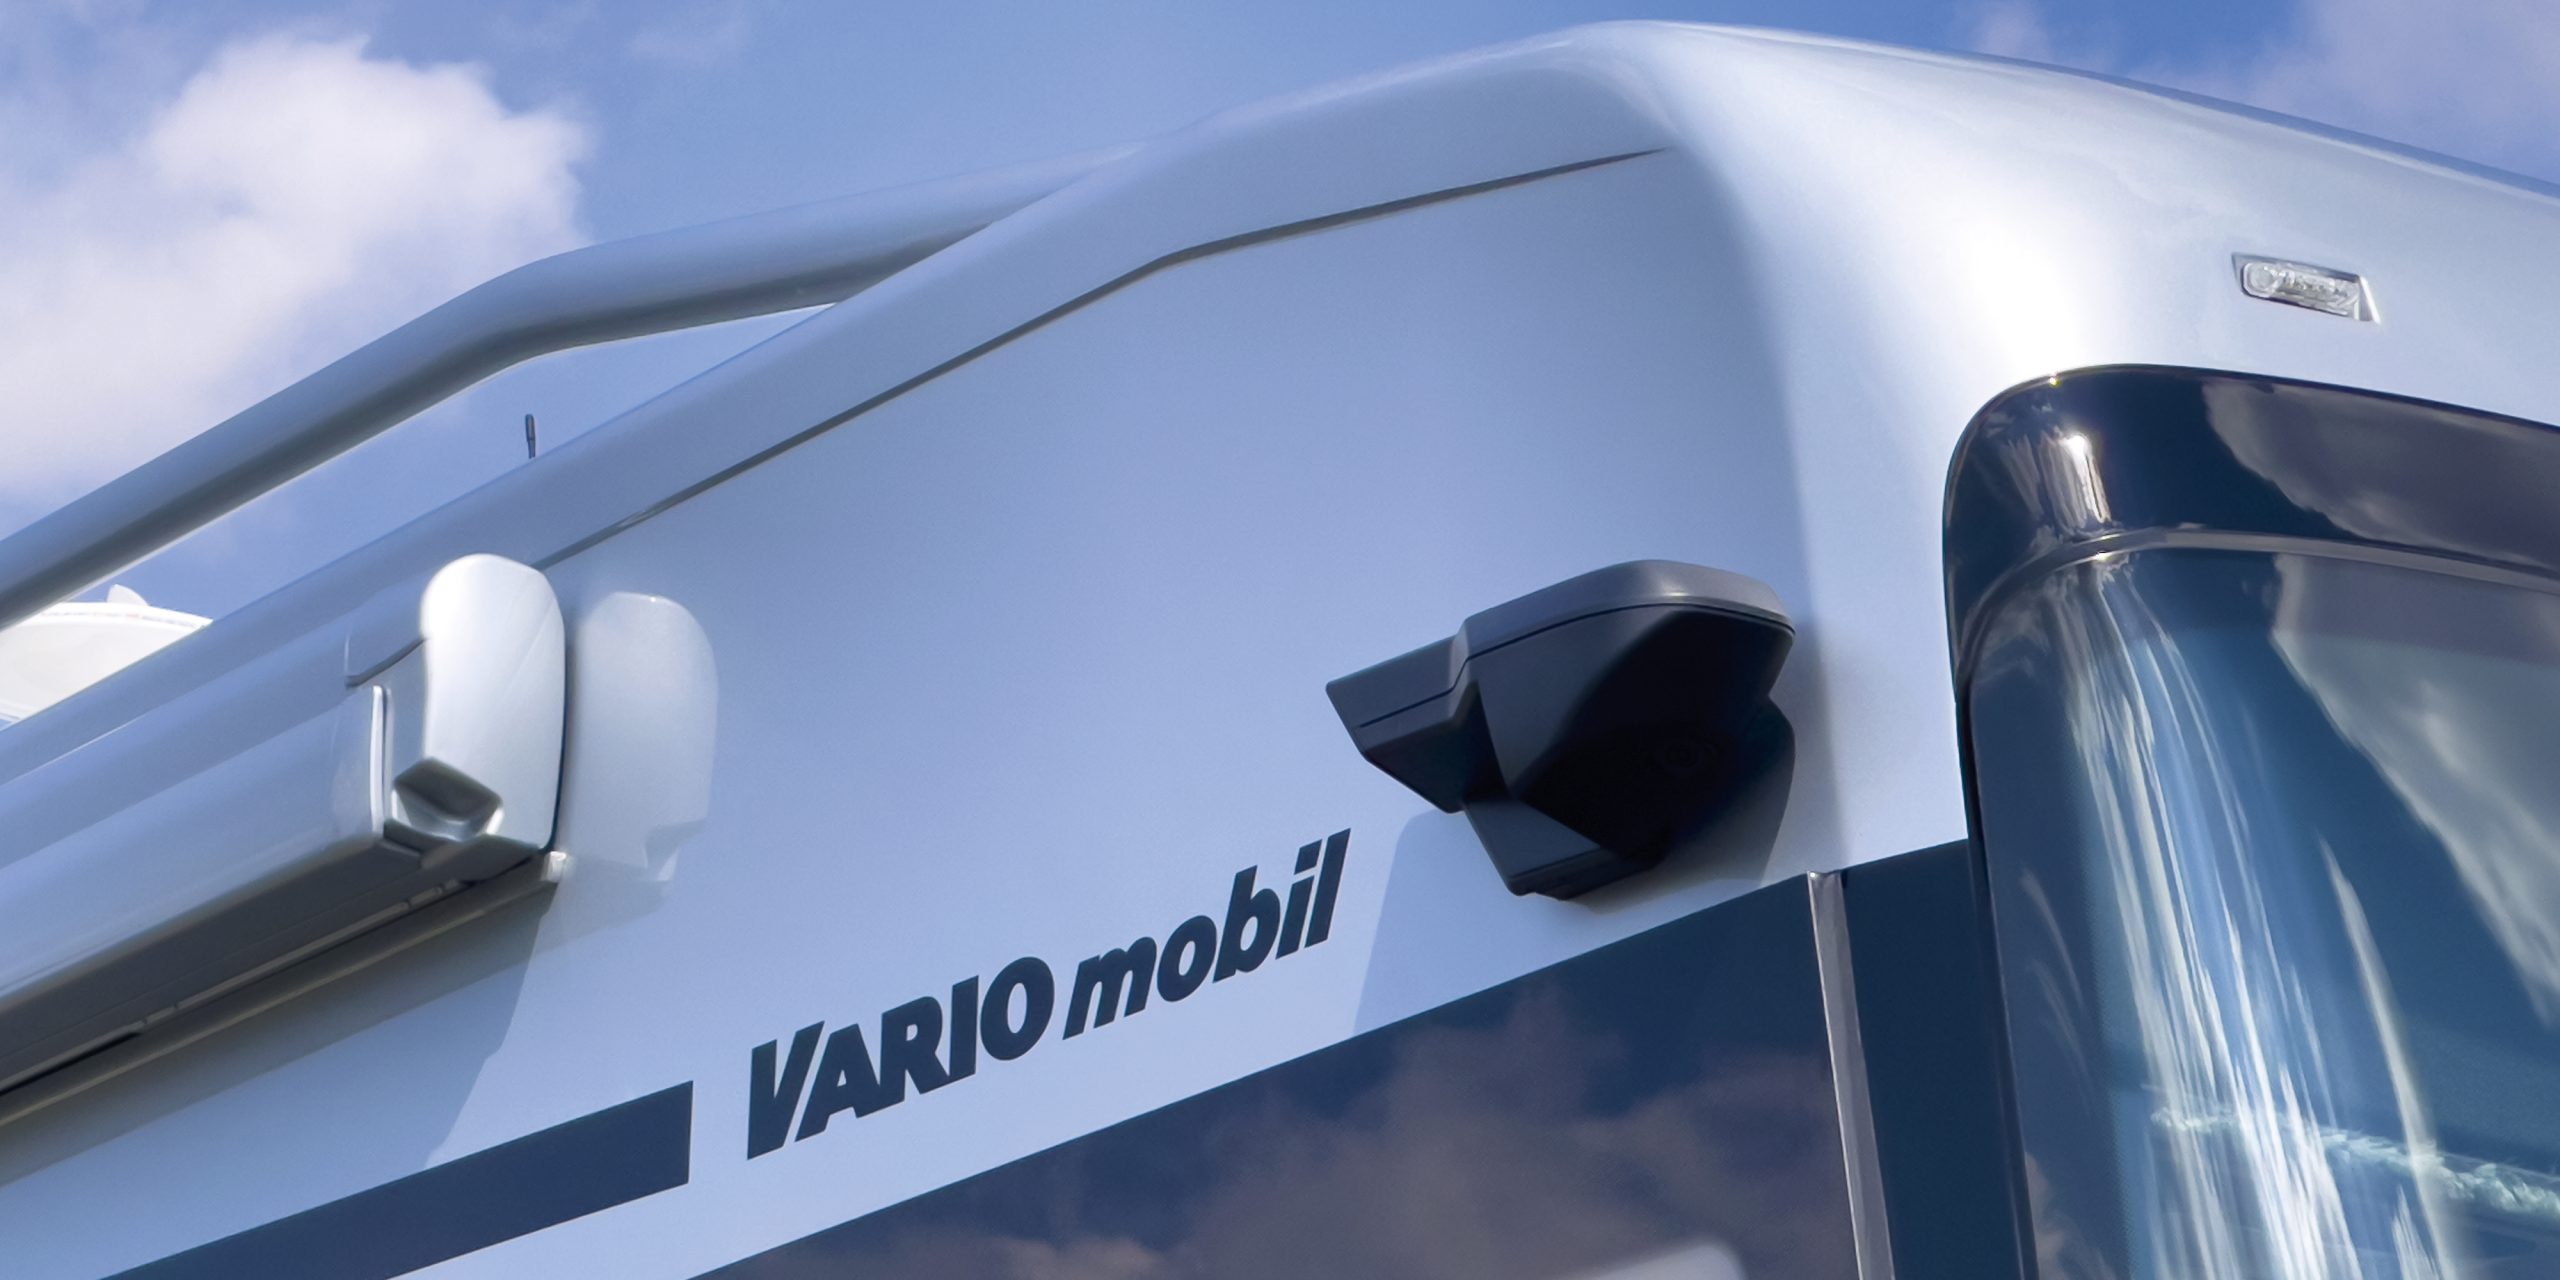 MIRROR CAM | Digital eyes for your safety in the motorhome